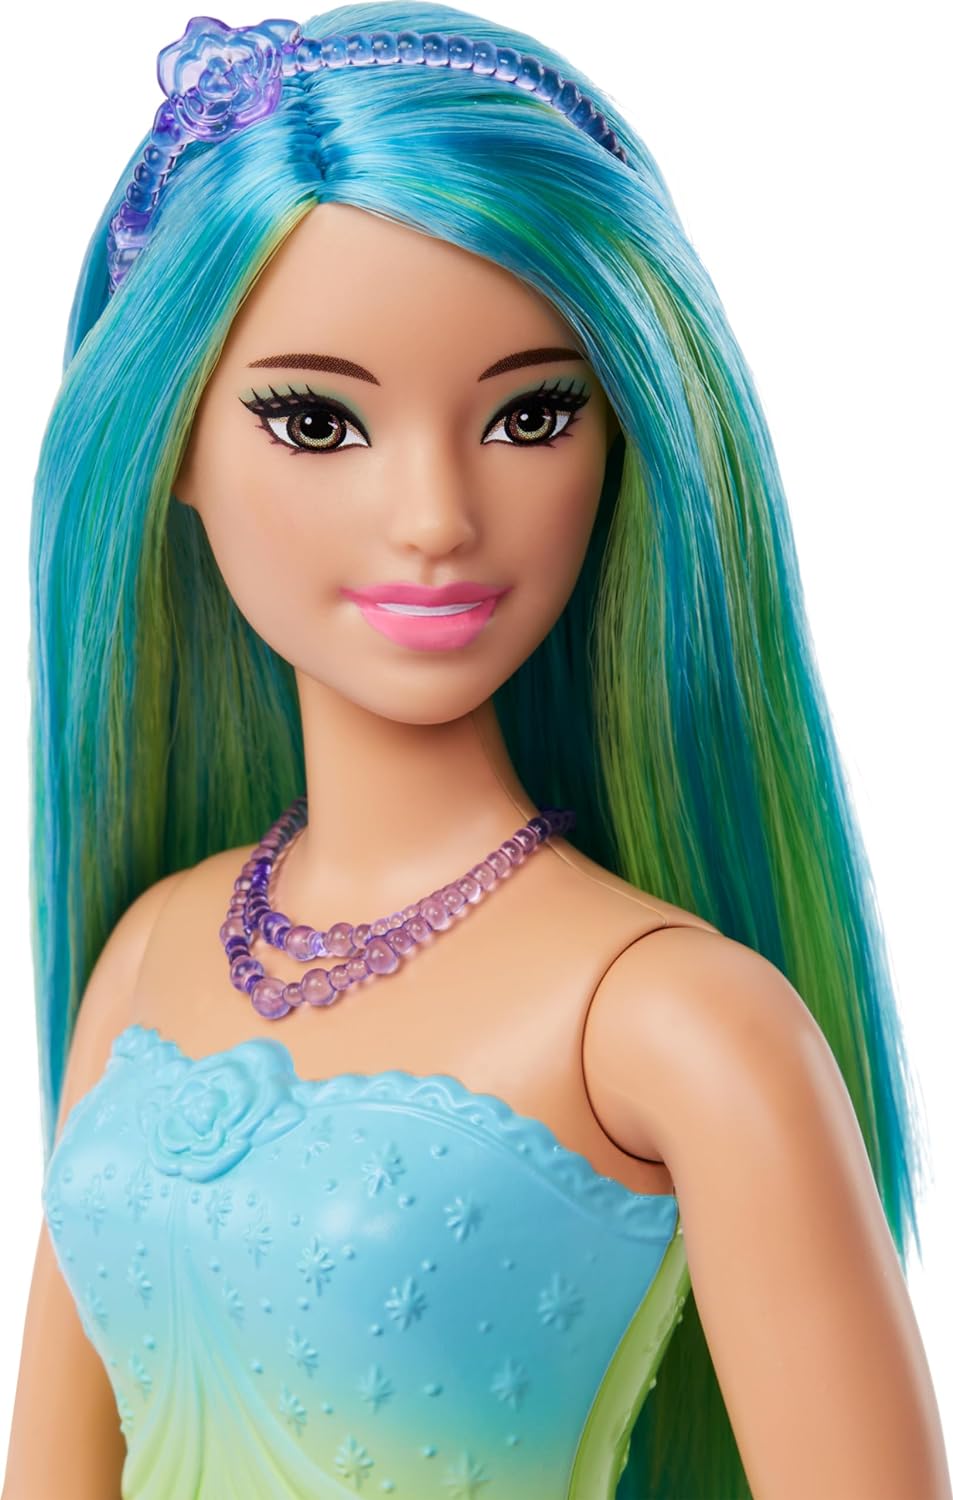 Barbie Royal Doll with Blue-Highlighted Hair, Butterfly-Print Skirt and Accessories